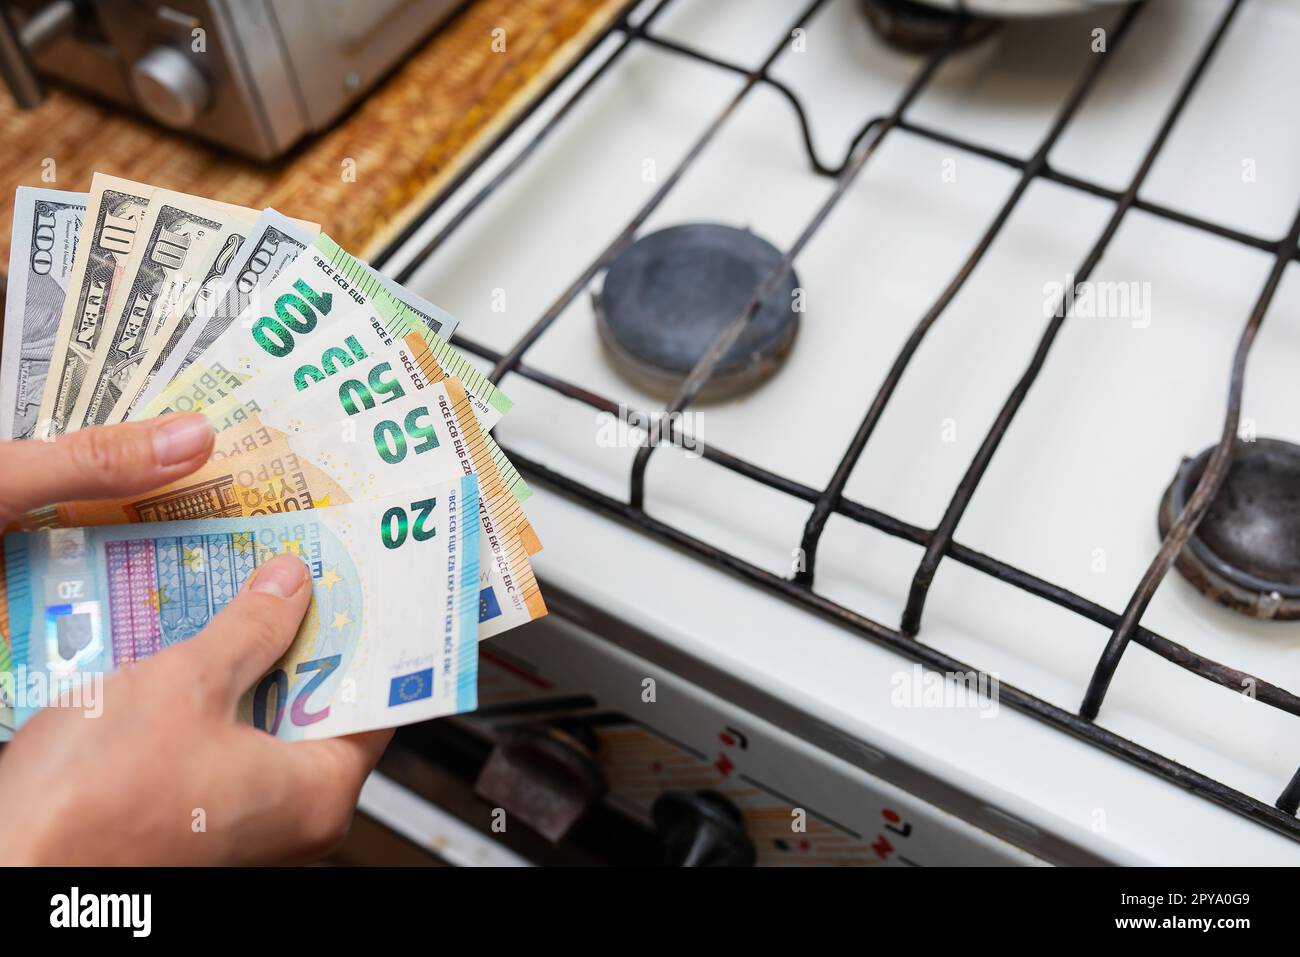 Payment of utility bills, calculations on a calculator. Euro and dollar bills lie near a burning gas burner. The concept of increasing the cost of natural gas supply and payment. Energy crisis, top view. Stock Photo